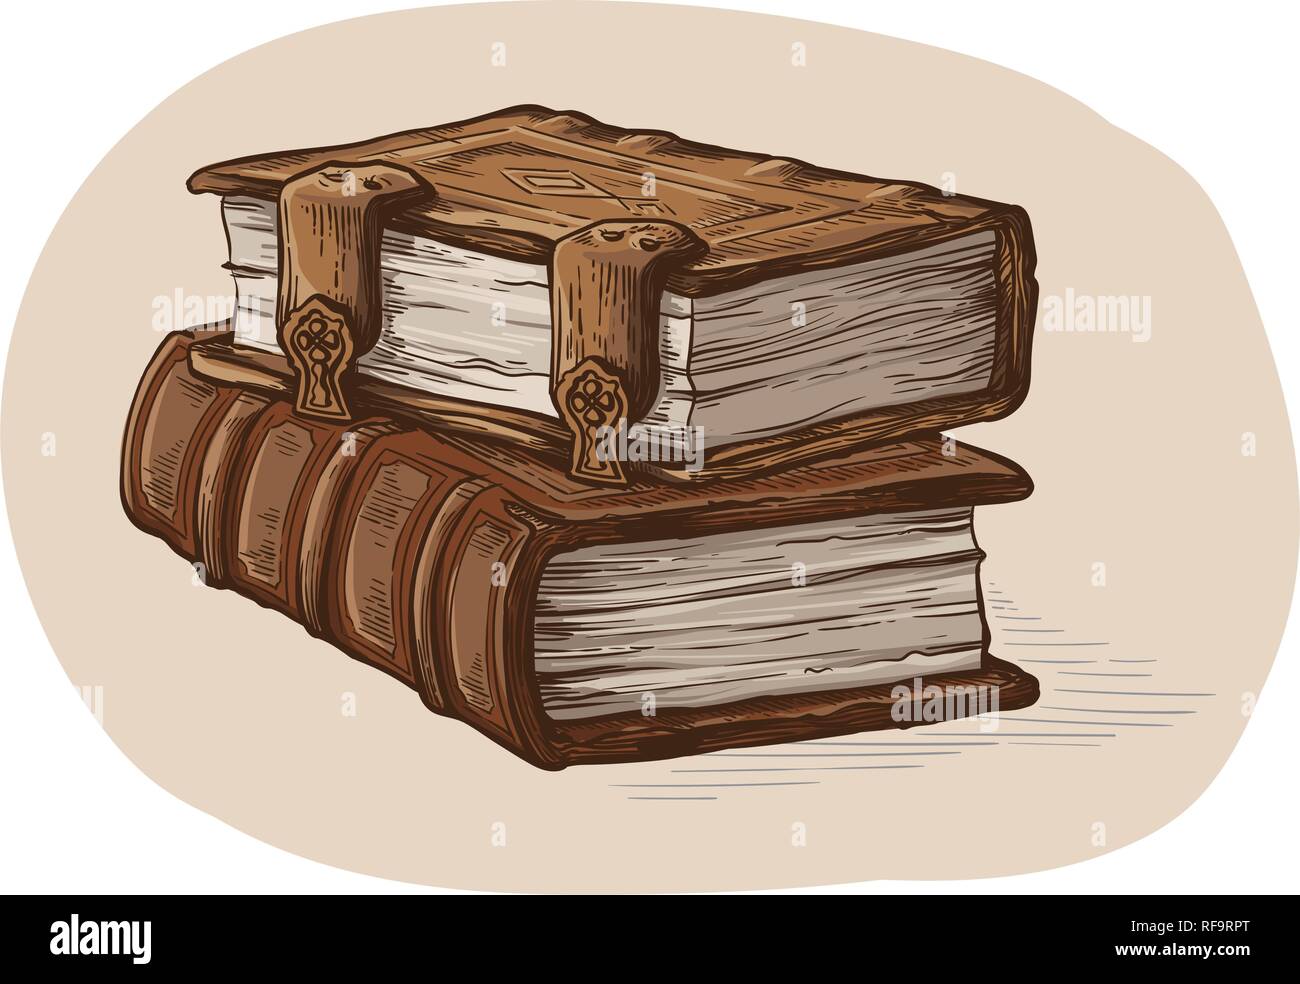 hand drawn sketch stack from two oldest books isolated on white